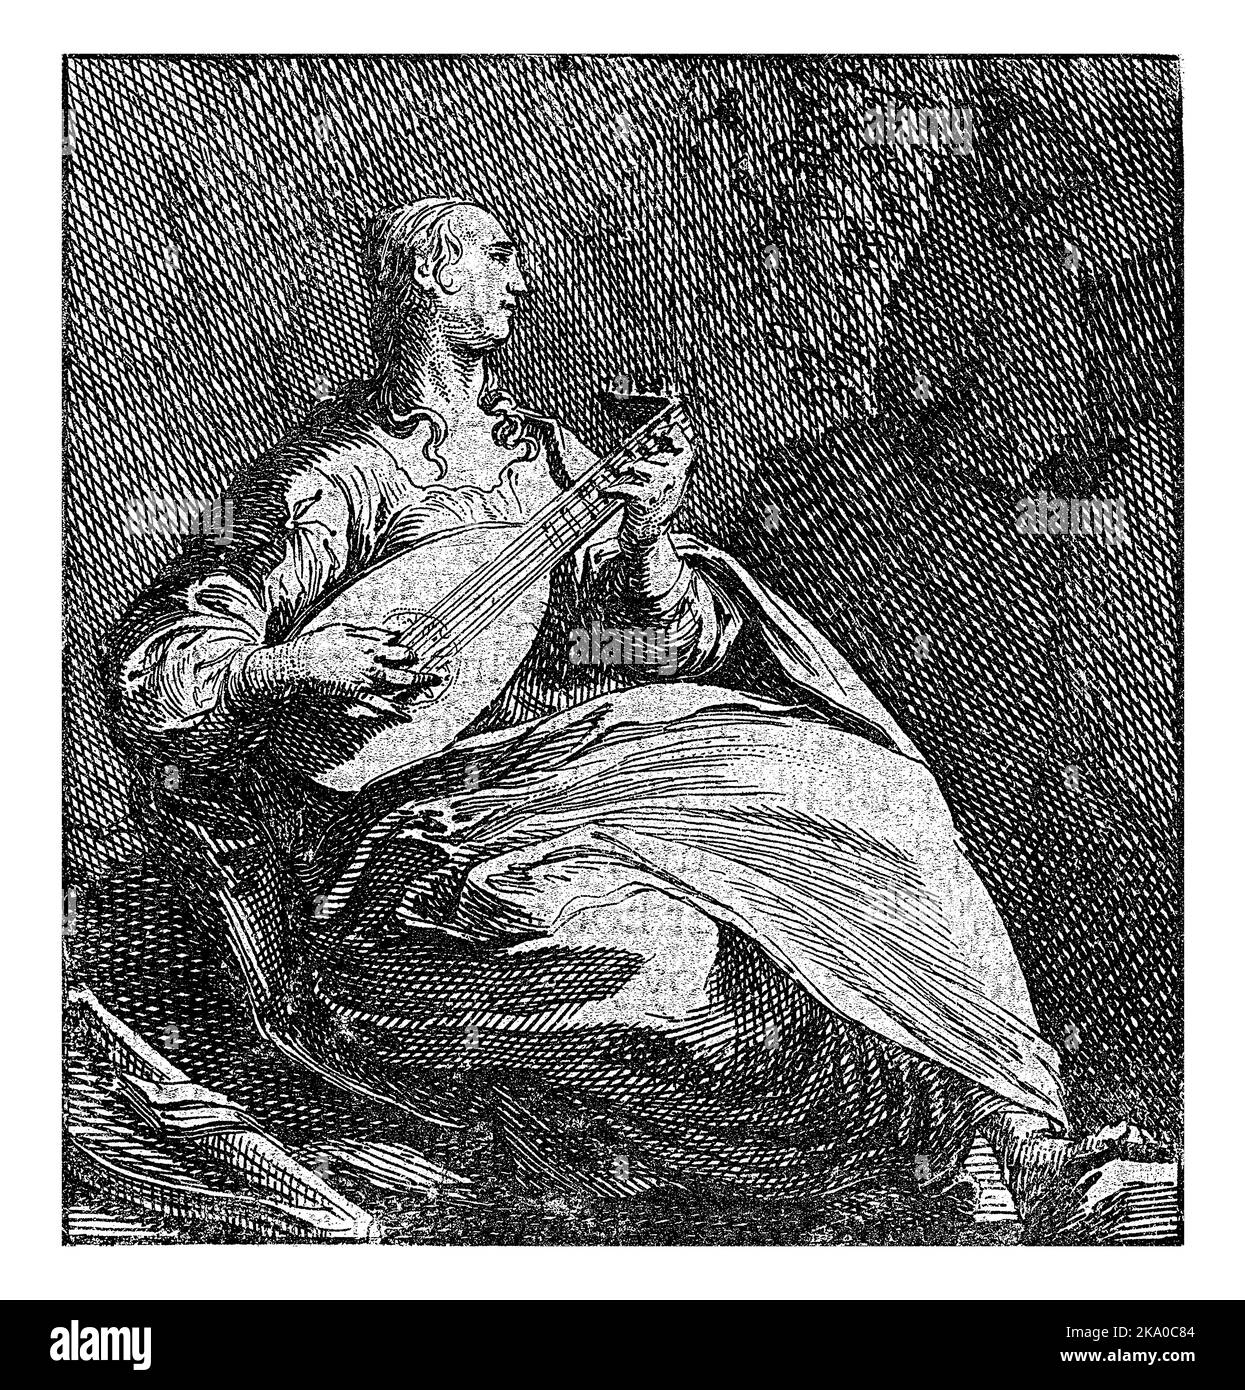 The seated Terpsichore, the muse of song and dance, plays the lute. To the left of her feet are a lyre and a book. Stock Photo